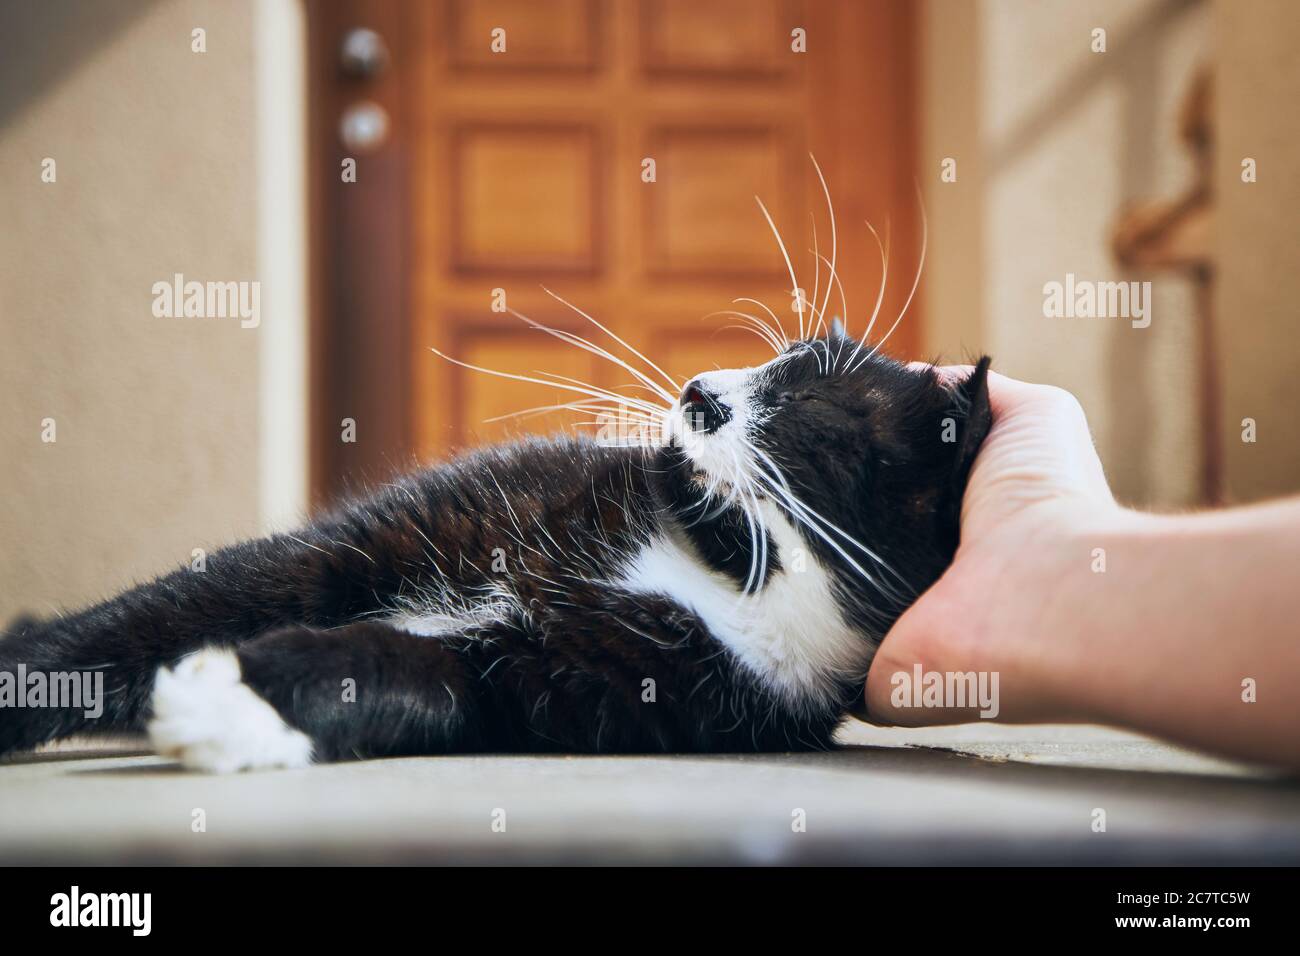 Domestic life with pet. Hand of man stroking cat in front of house. Stock Photo